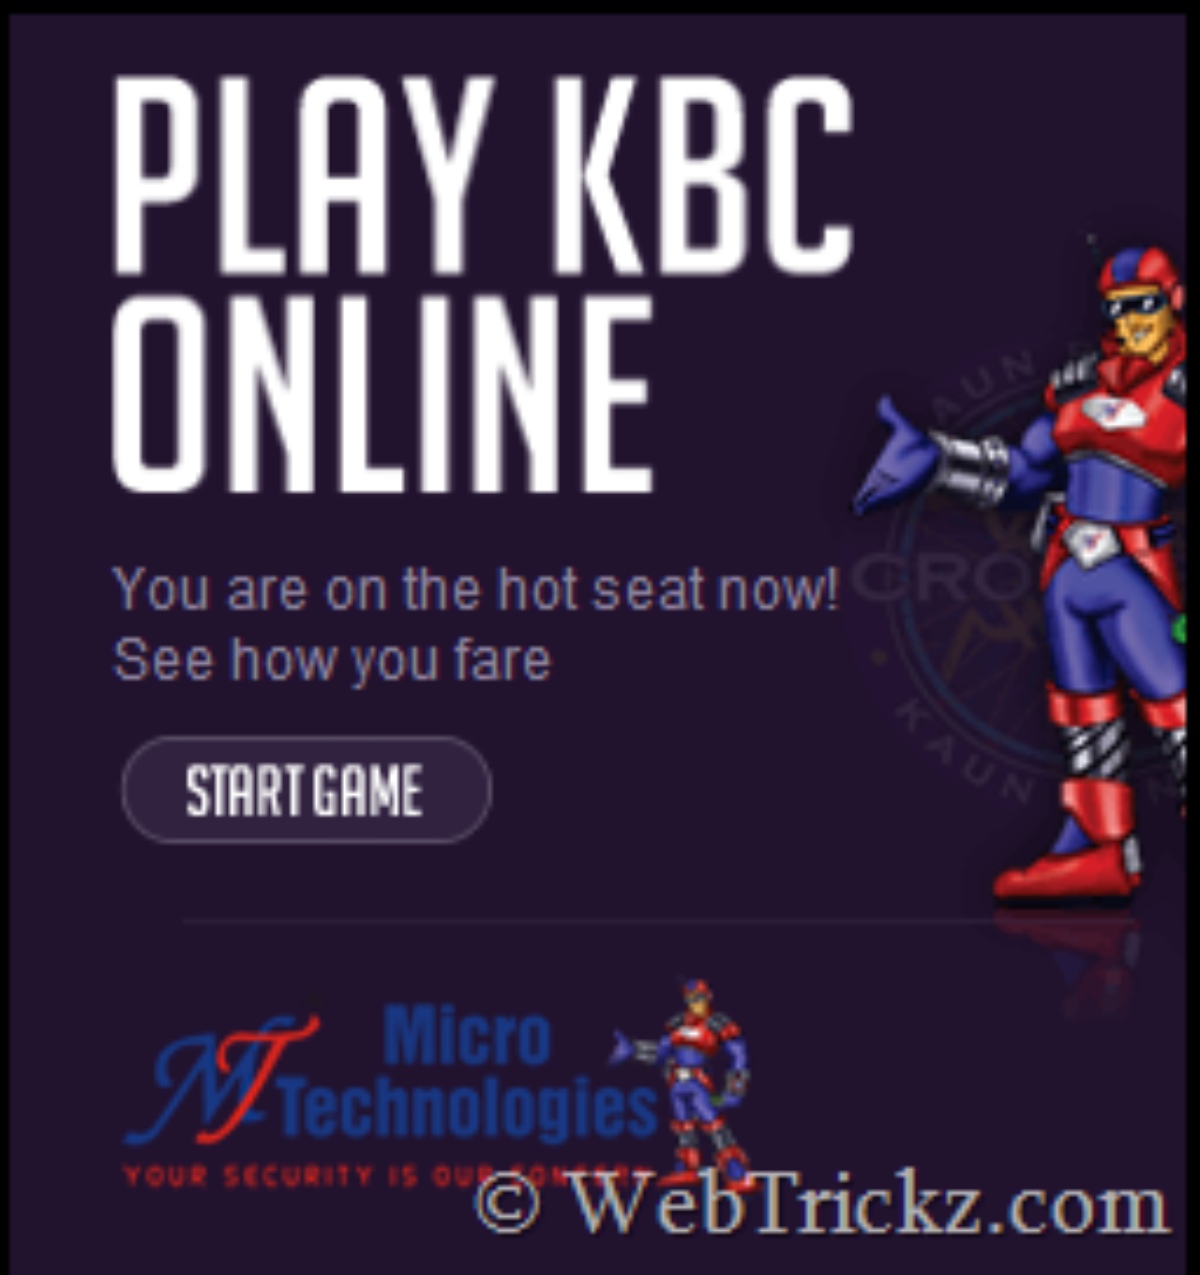 kbc online game for pc